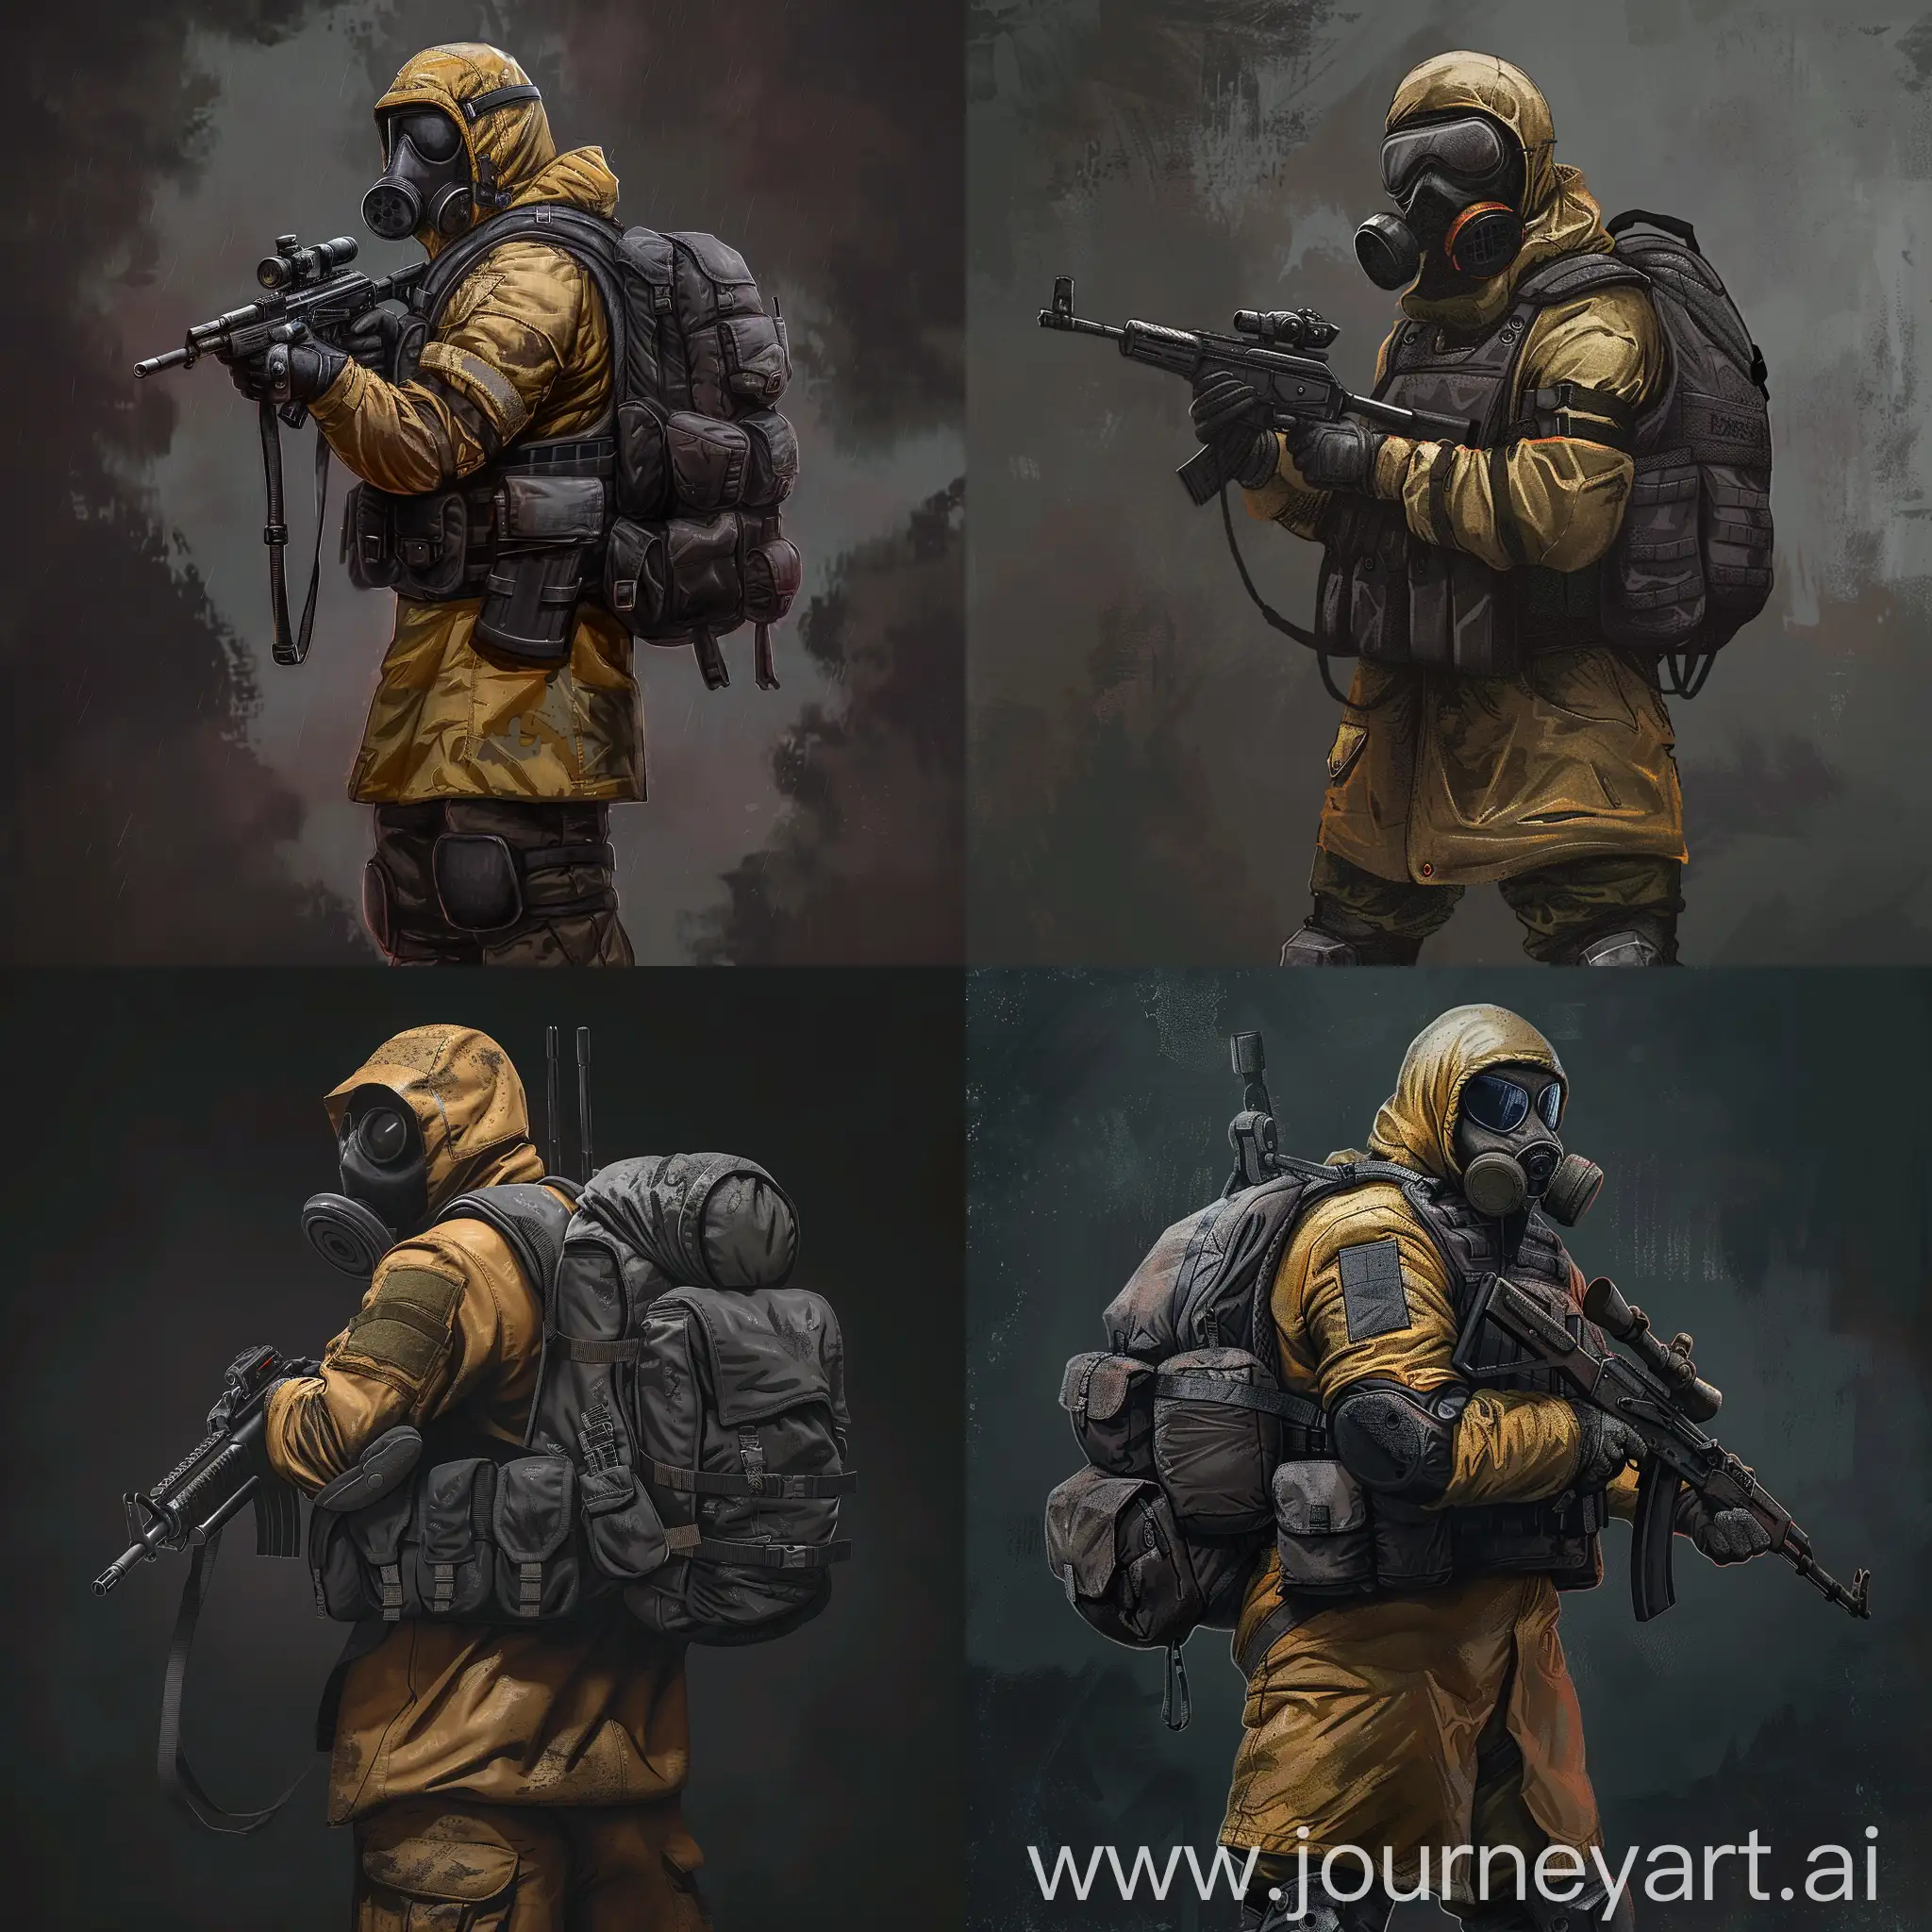 Digital design art mercenary from the universe of S.T.A.L.K.E.R., dressed in a dark orange military raincoat, gray military armor on his body, a gasmask on his face, a military backpack on his back, a rifle in his hands.